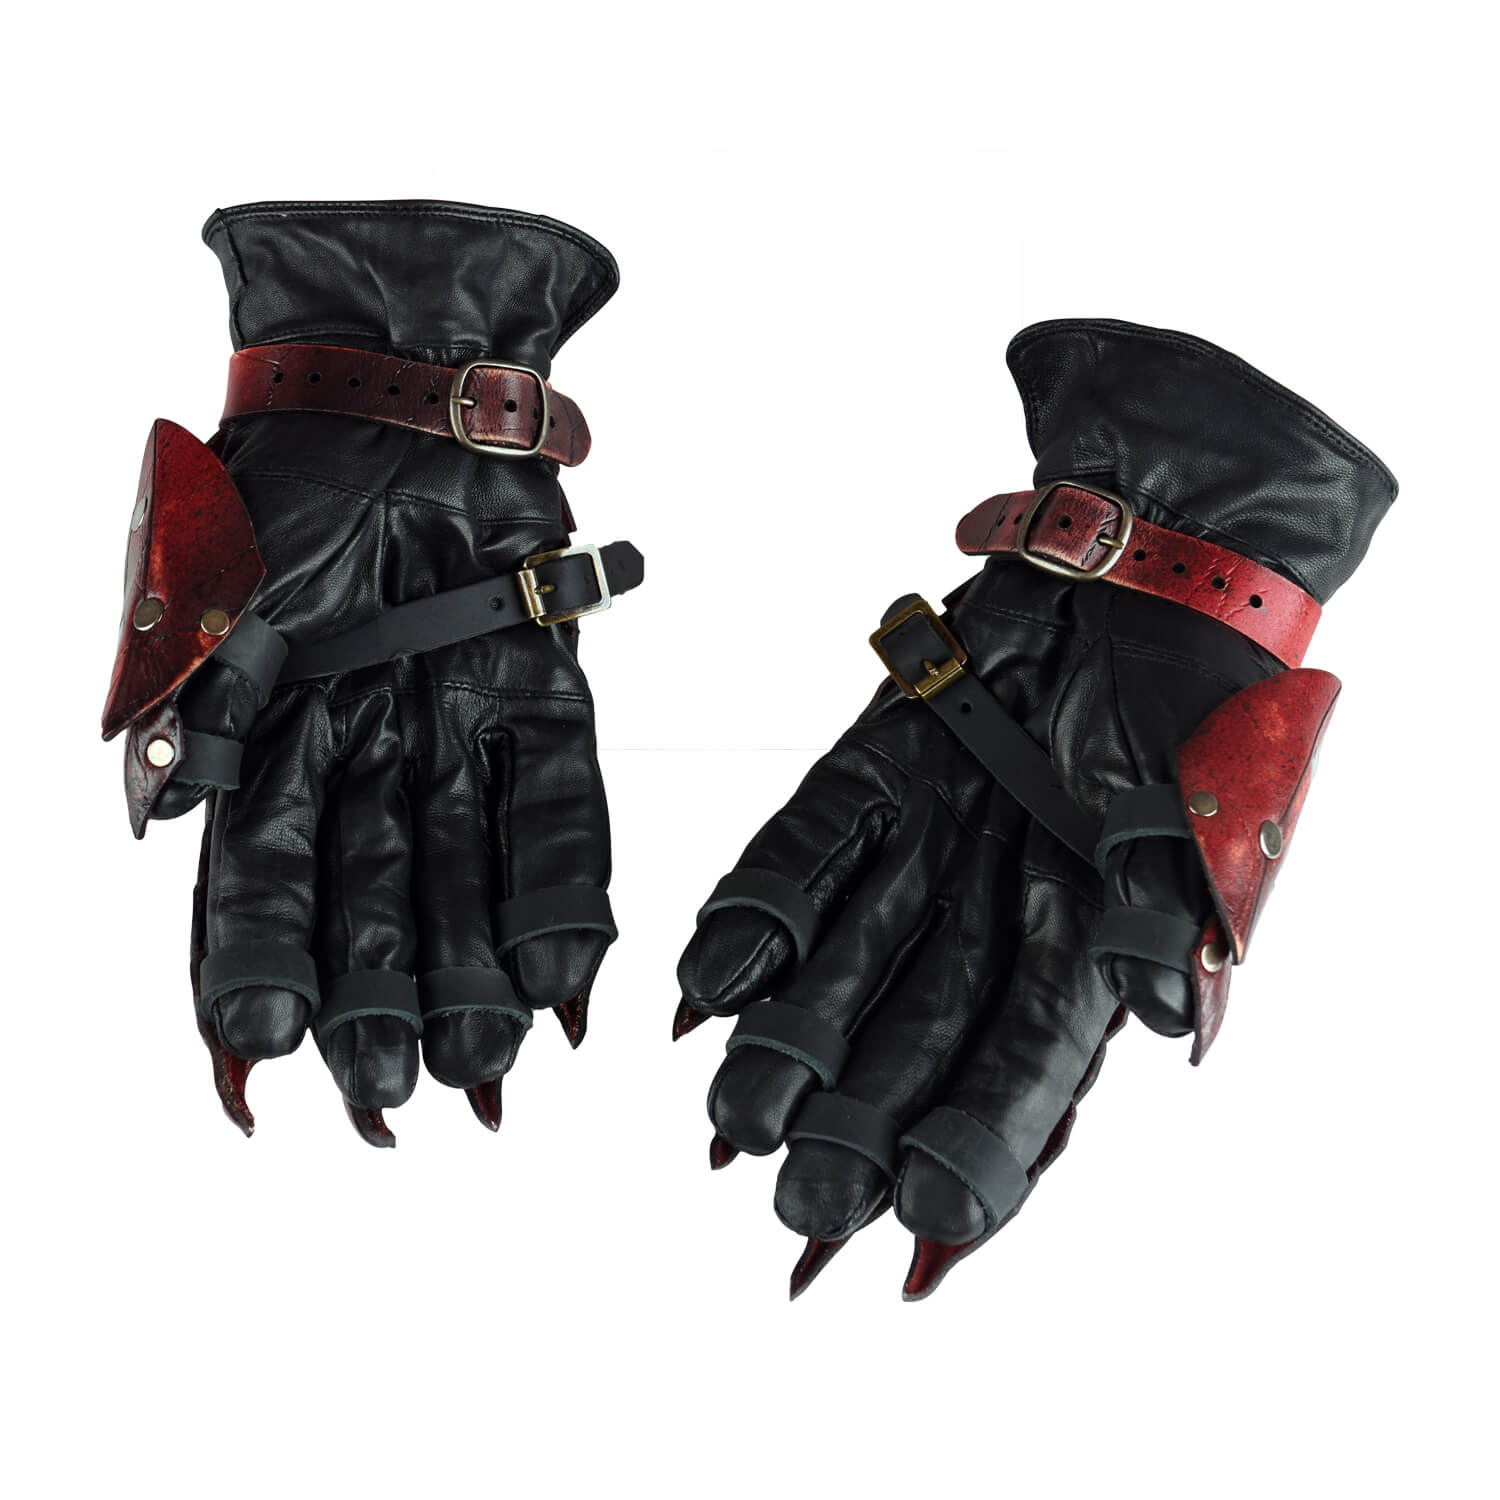 Chaos Gauntlets